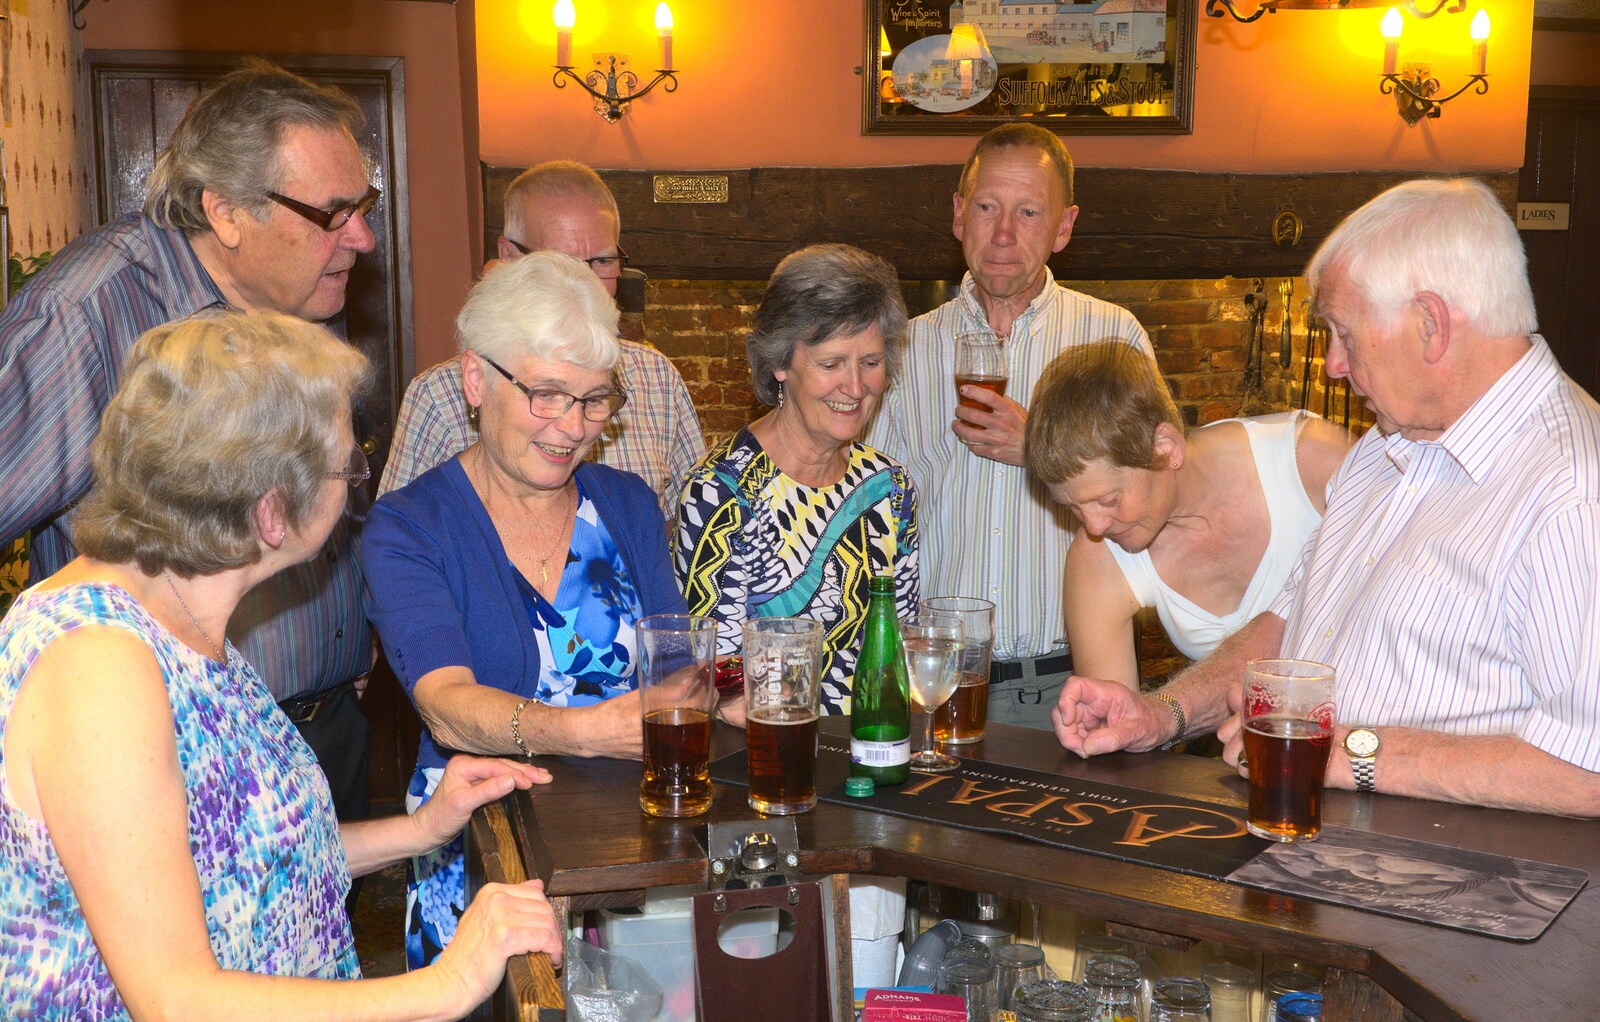 The Saga group again from A Retirement: The Last Night of The Swan Inn, Brome, Suffolk - 3rd June 2017